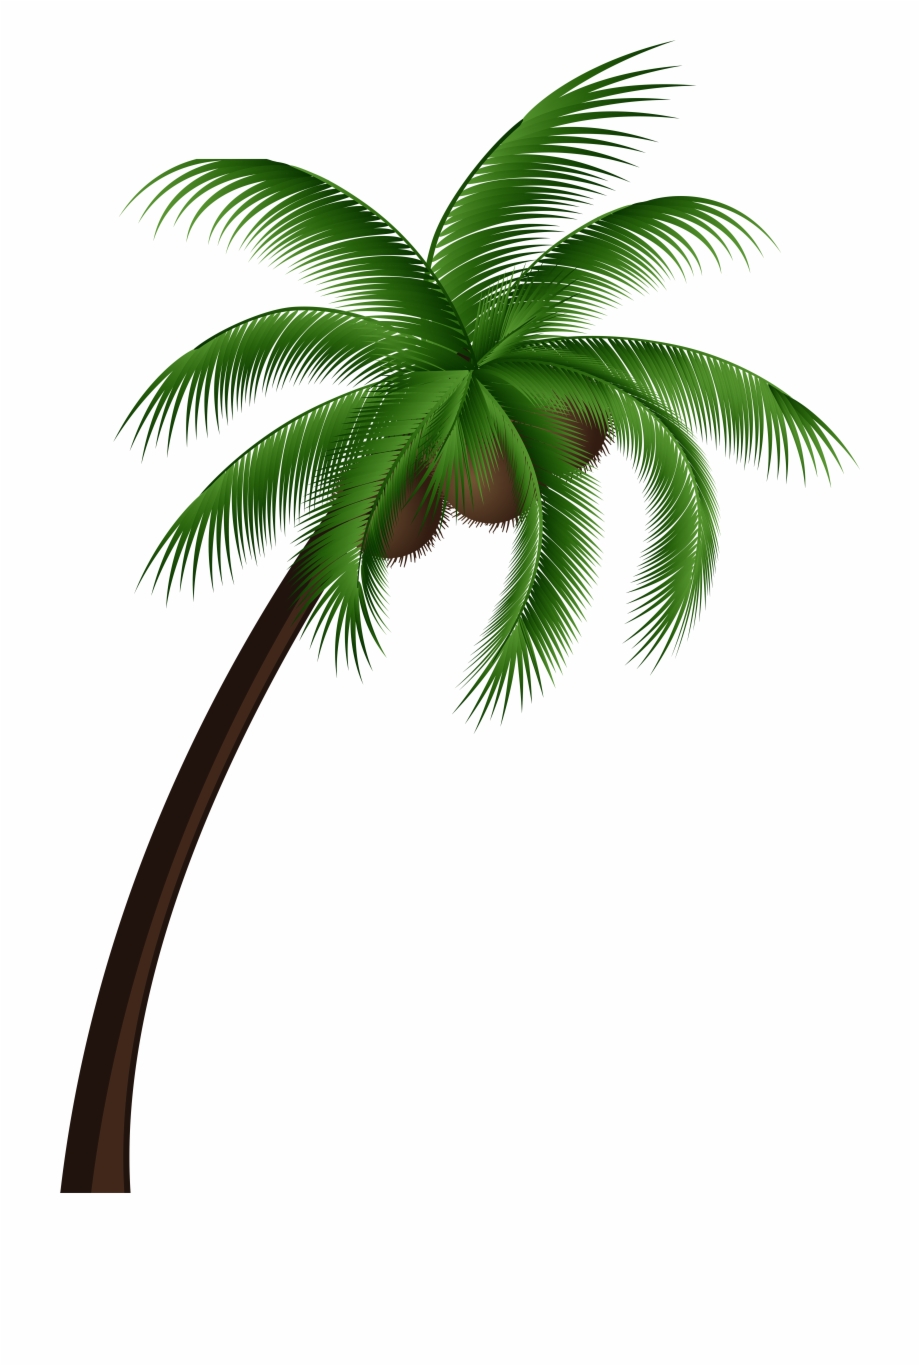 Coconut Palm Tree Png Clip Art.